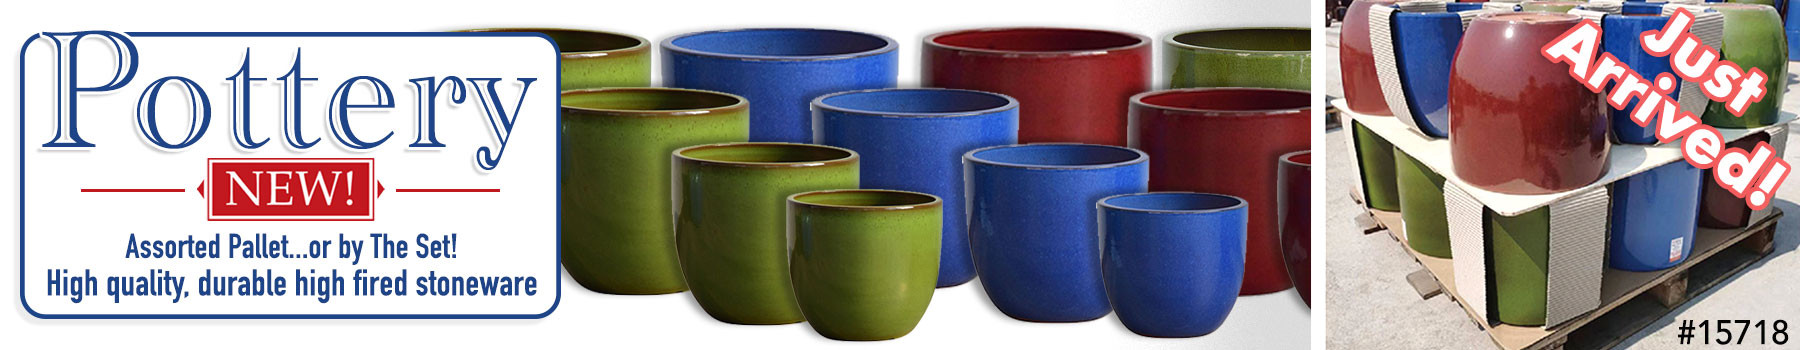 New Pottery By the Pallet, High Quality Stoneware